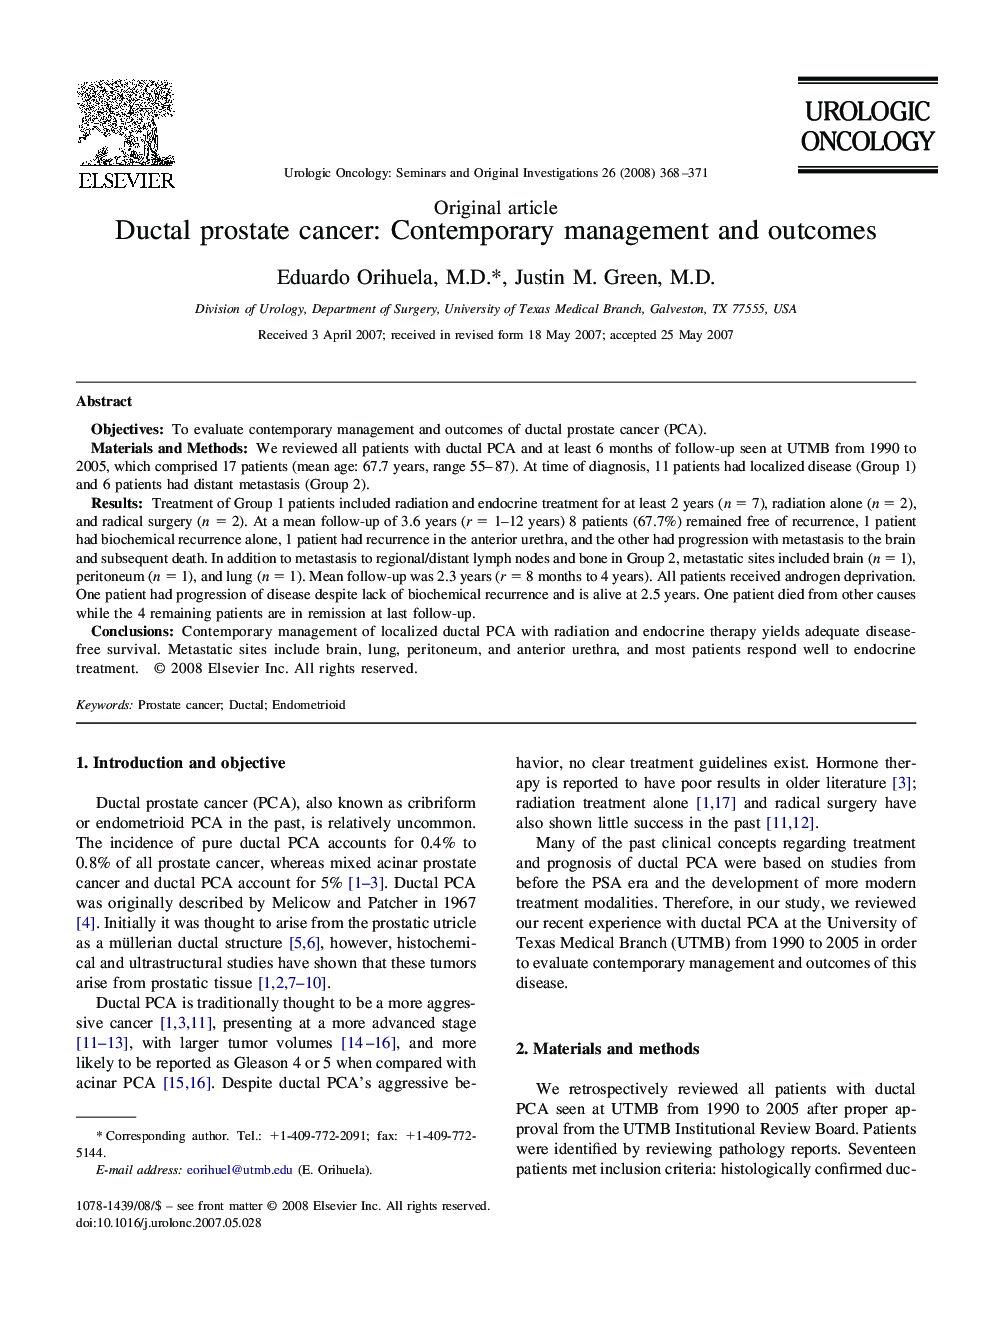 Ductal prostate cancer: Contemporary management and outcomes